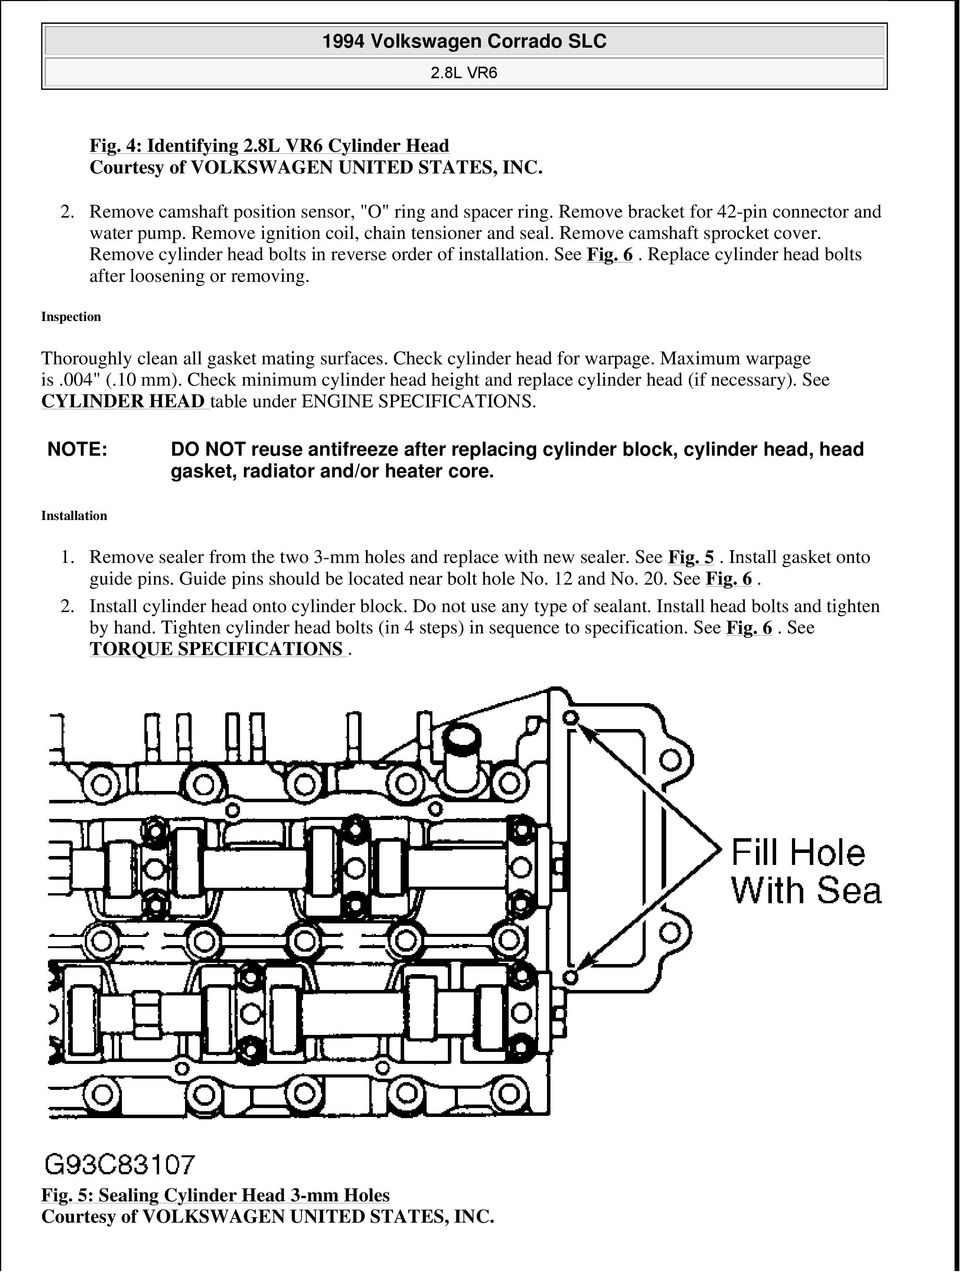 Inspection Thoroughly clean all gasket mating surfaces. Check cylinder head for warpage. Maximum warpage is.004" (.10 mm). Check minimum cylinder head height and replace cylinder head (if necessary).